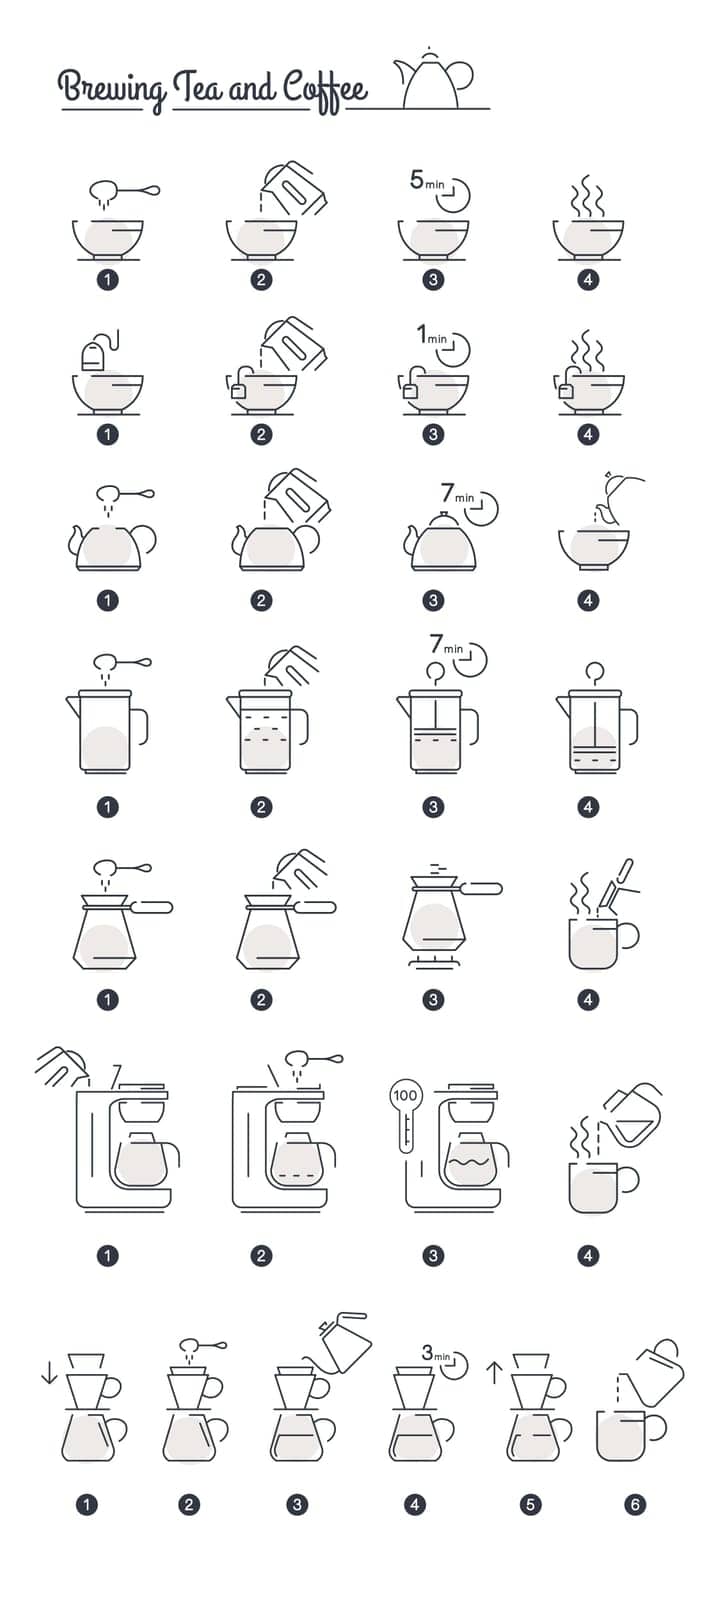 Making coffee and tea, instructions and steps. How to brew hot beverage infographics. Pots and kettle and cezve, cups and warm water. Drinks with caffeine for morning breakfast. Vector in flat style